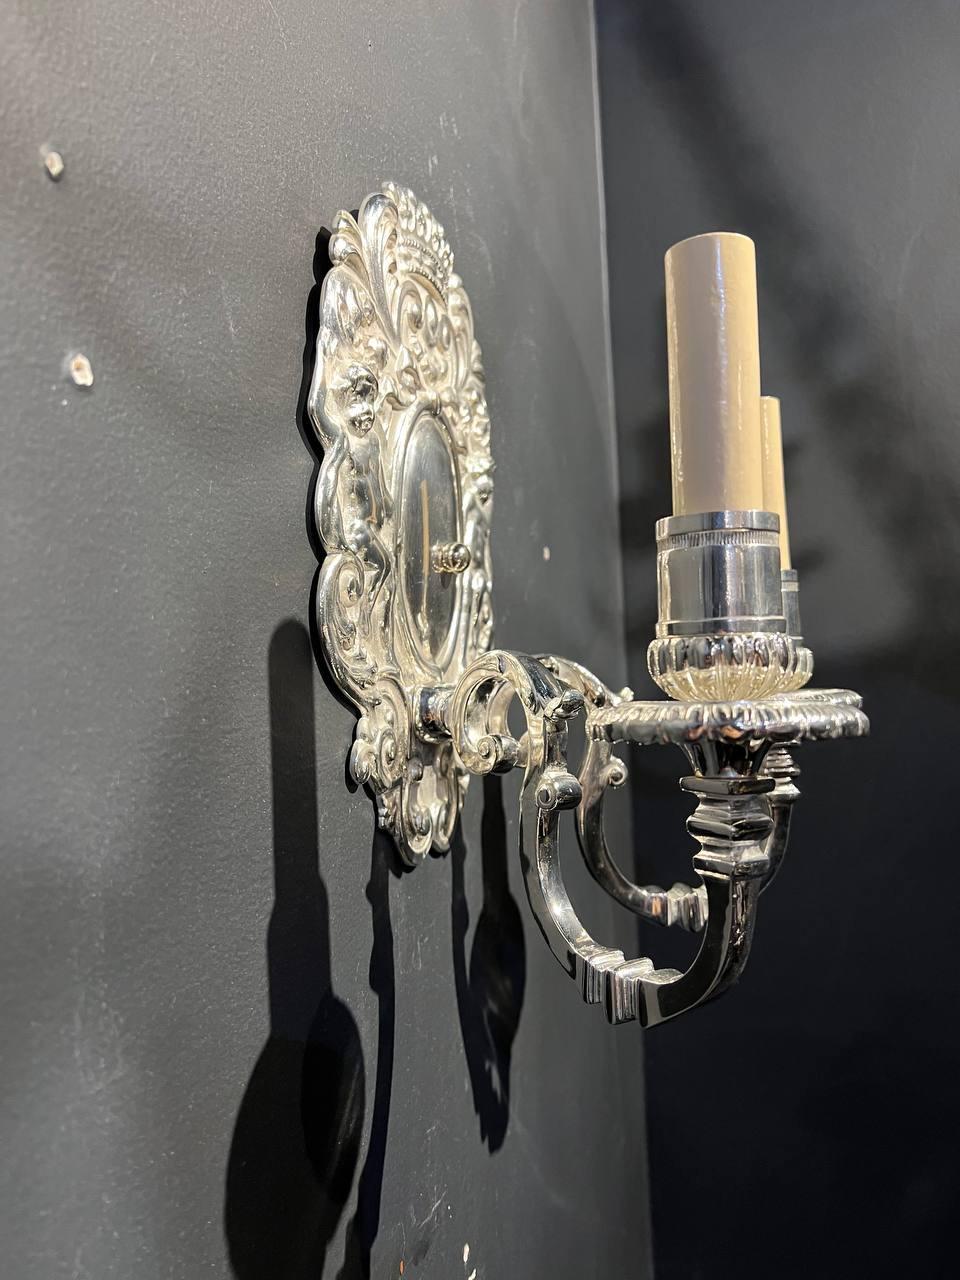 A circa 1920's Silver Plated Sconces with cherubs design and two lights